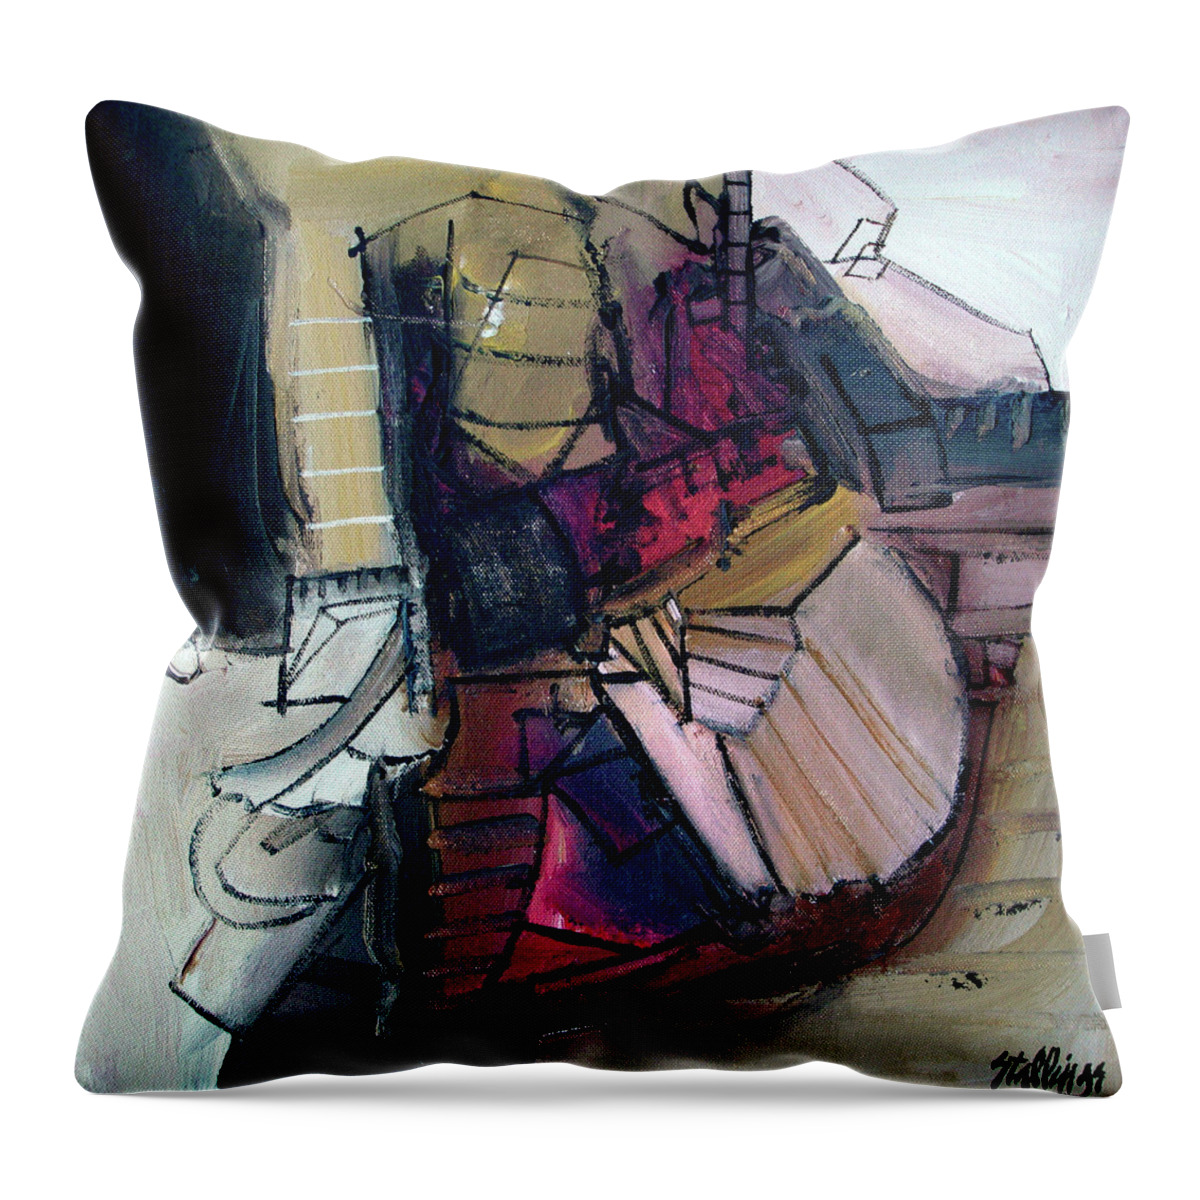 Abstract Throw Pillow featuring the painting Five Till Three by Jim Stallings